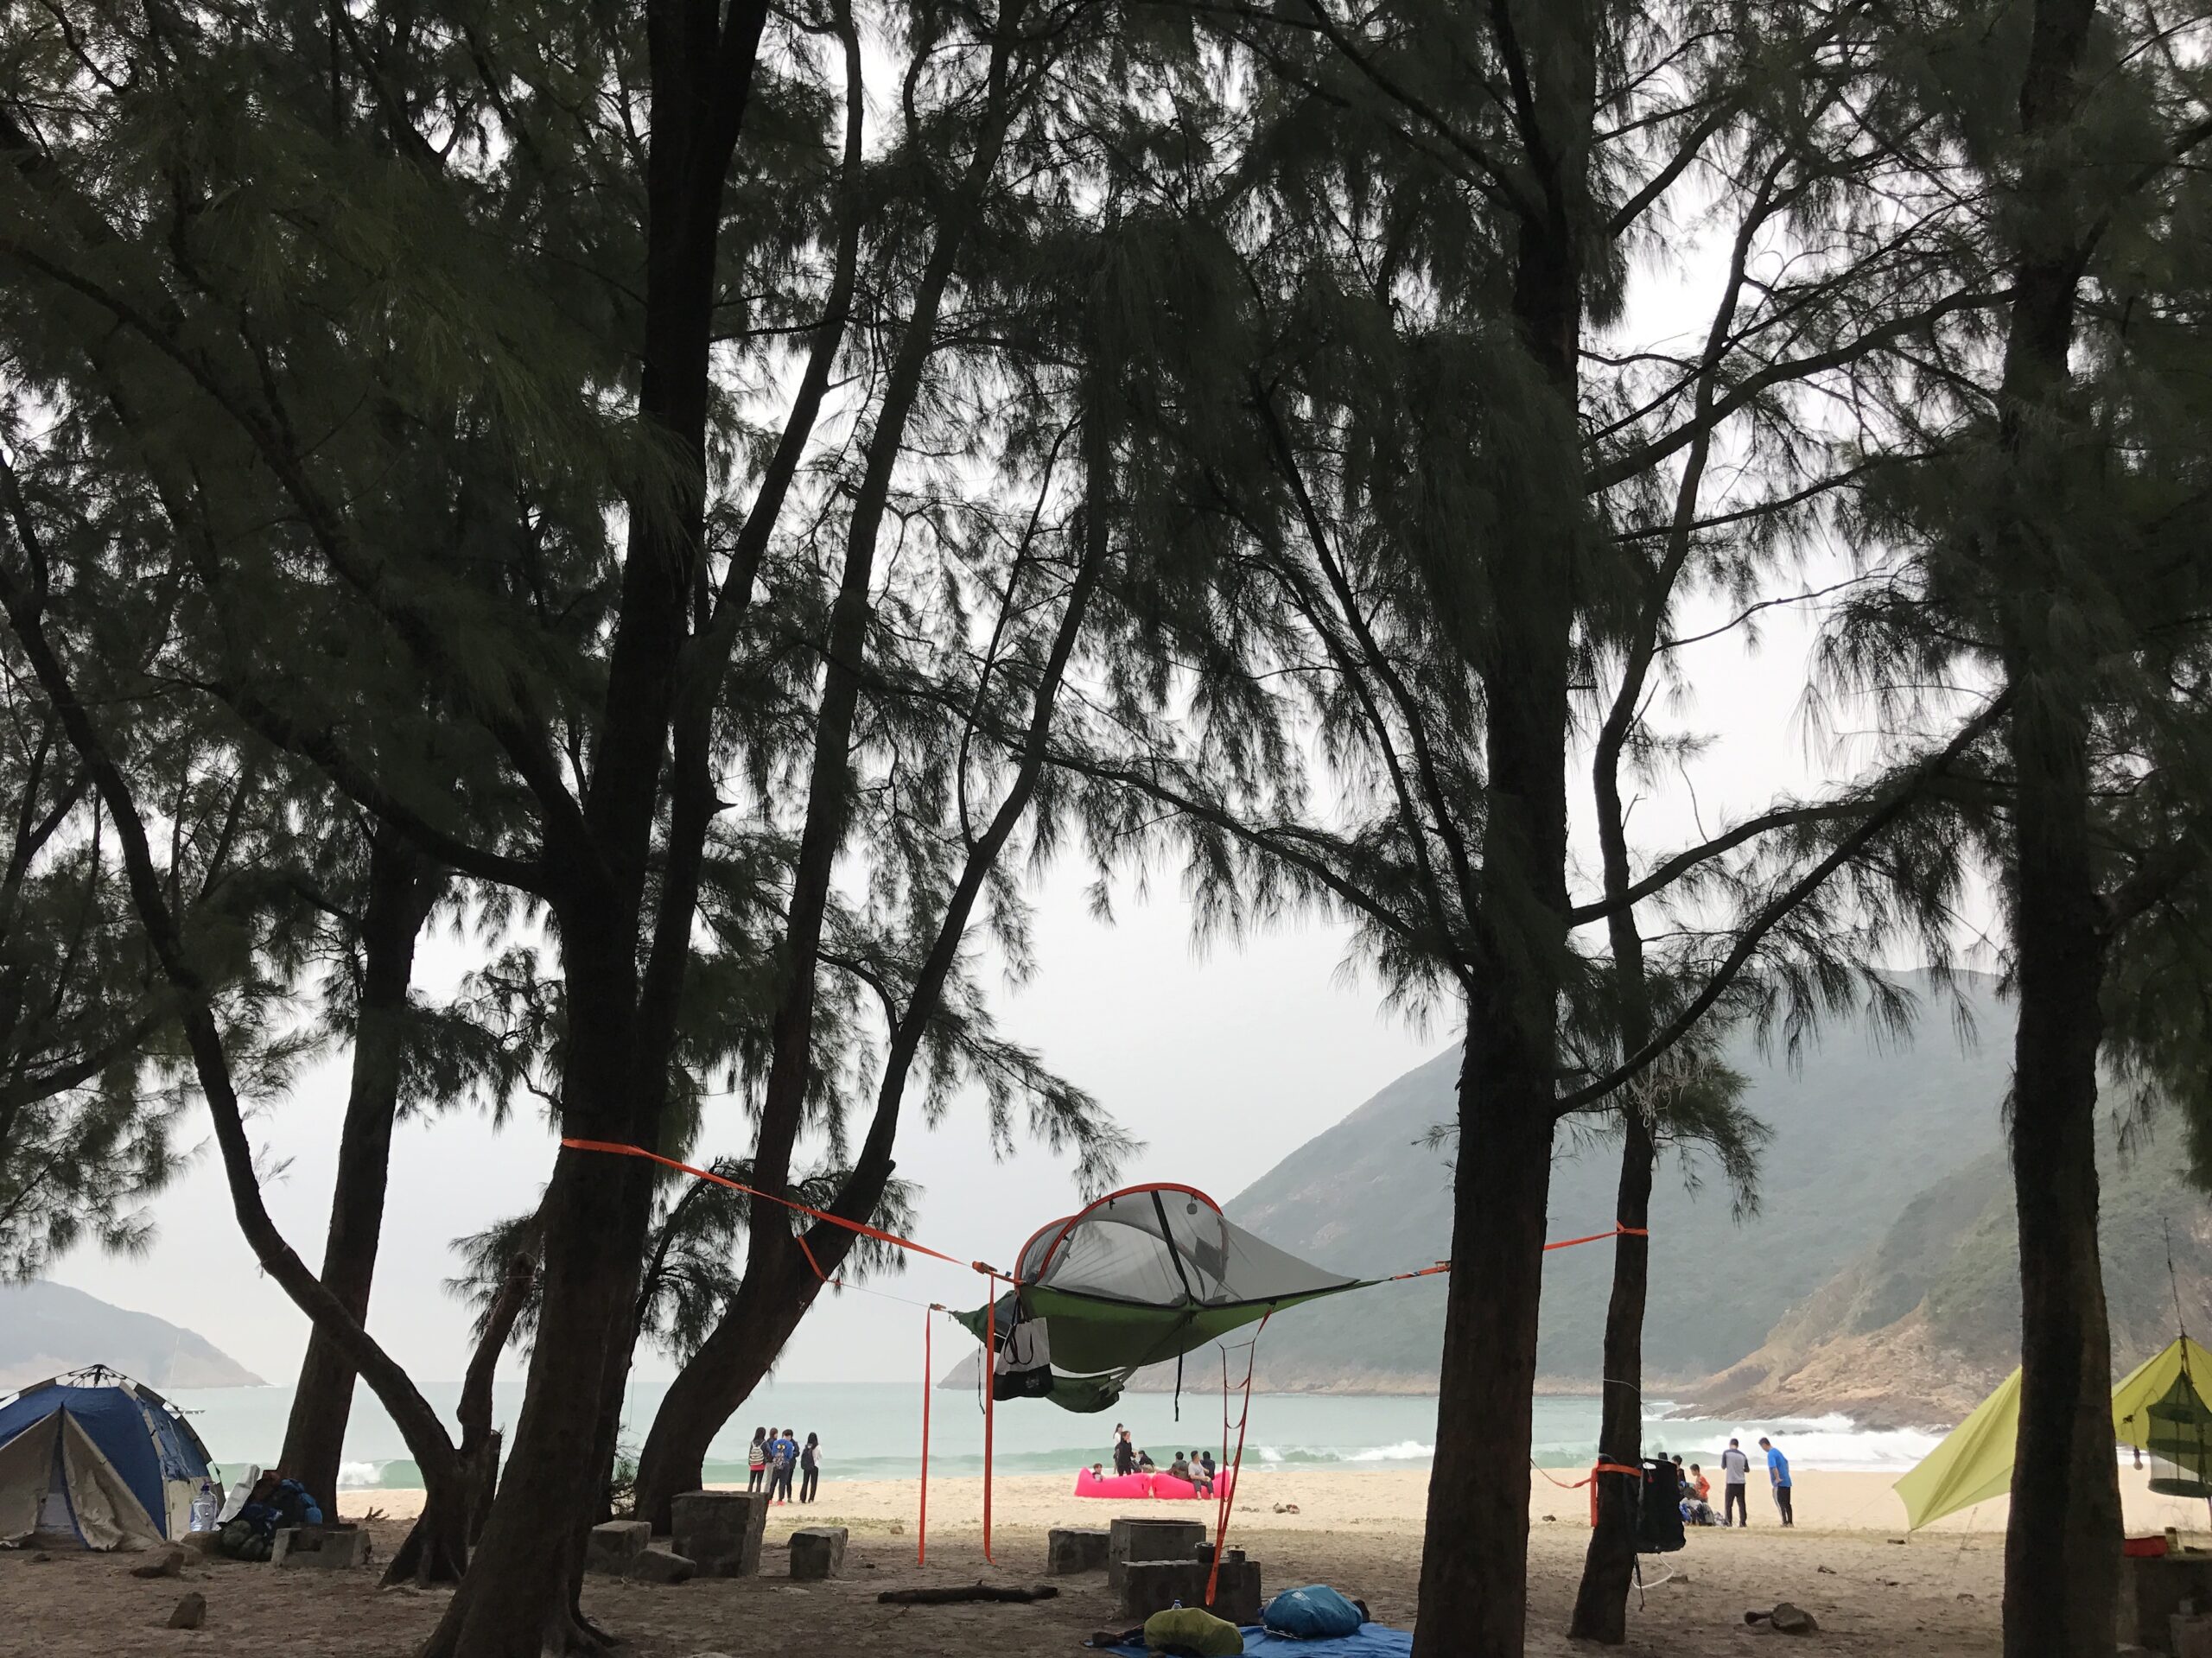 A campsite on the Maclehose Trail